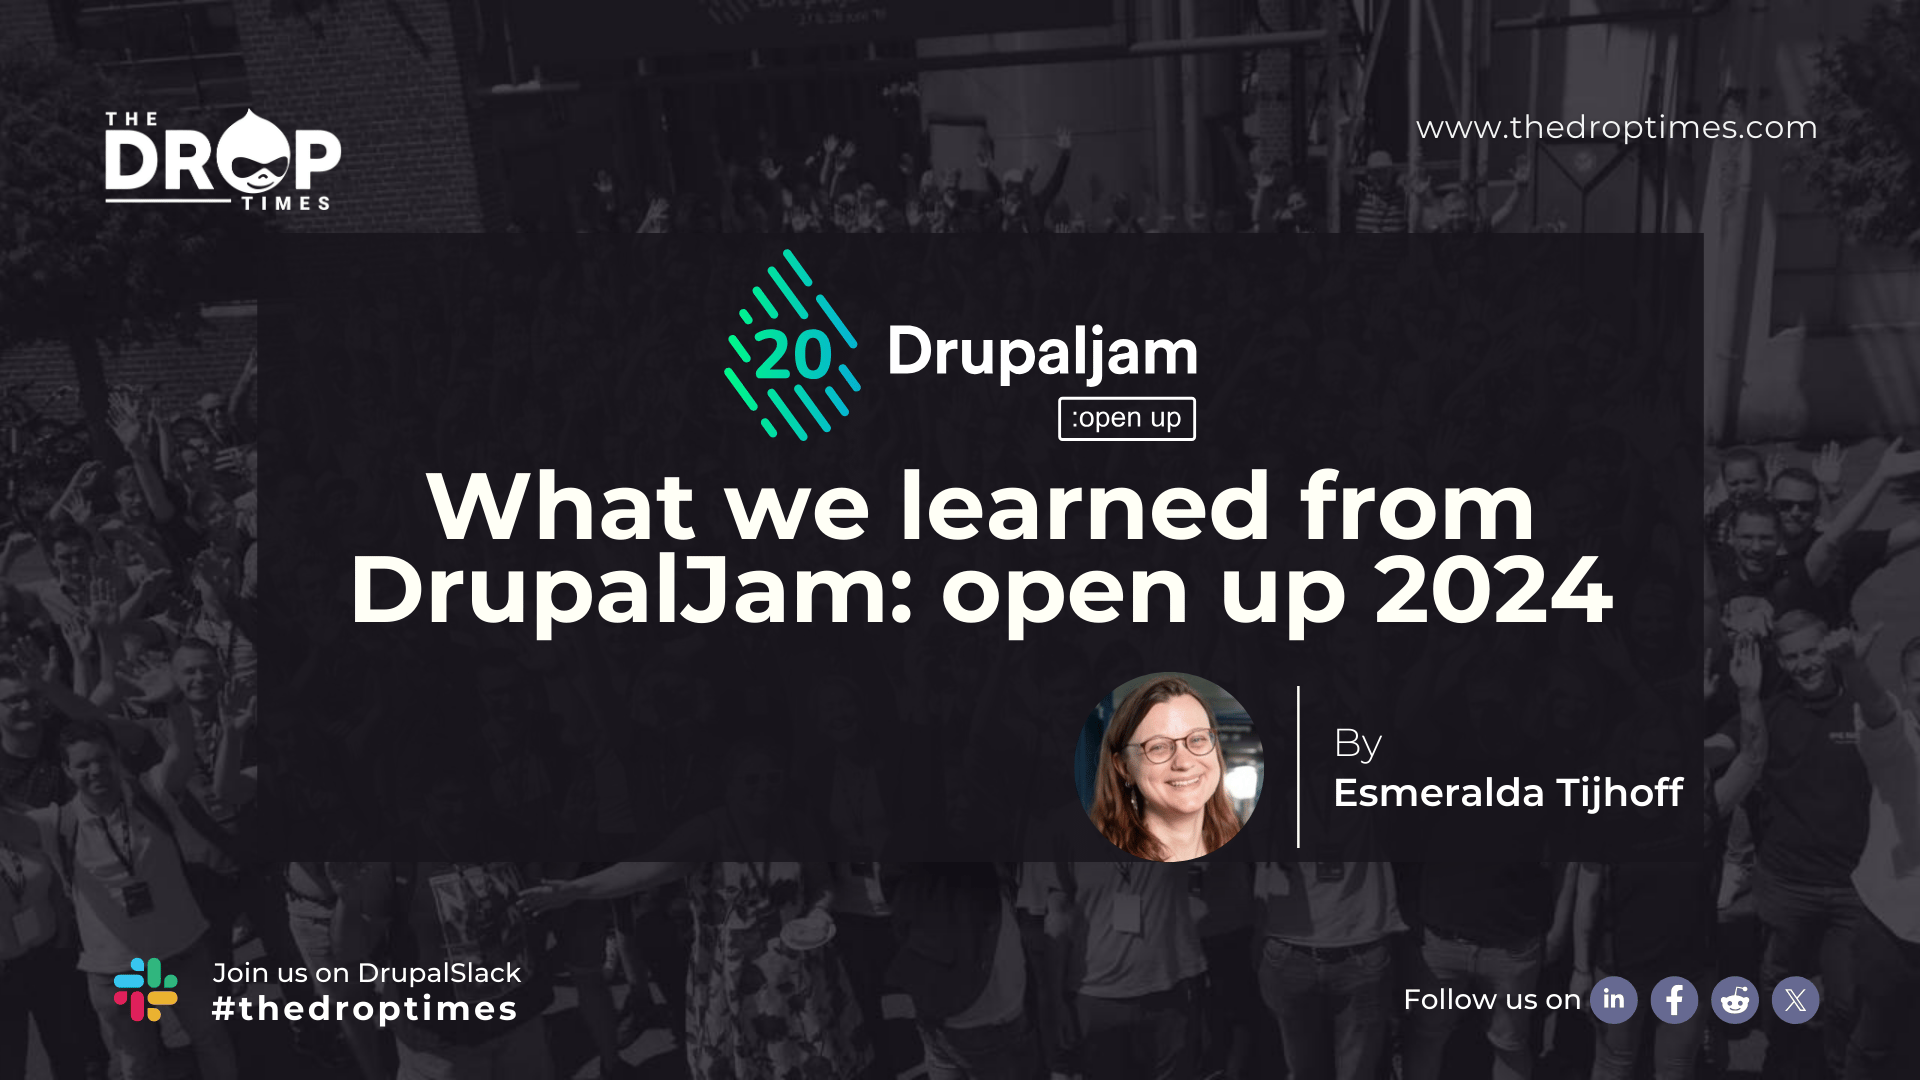 What we learned from Drupaljam: open up 2024